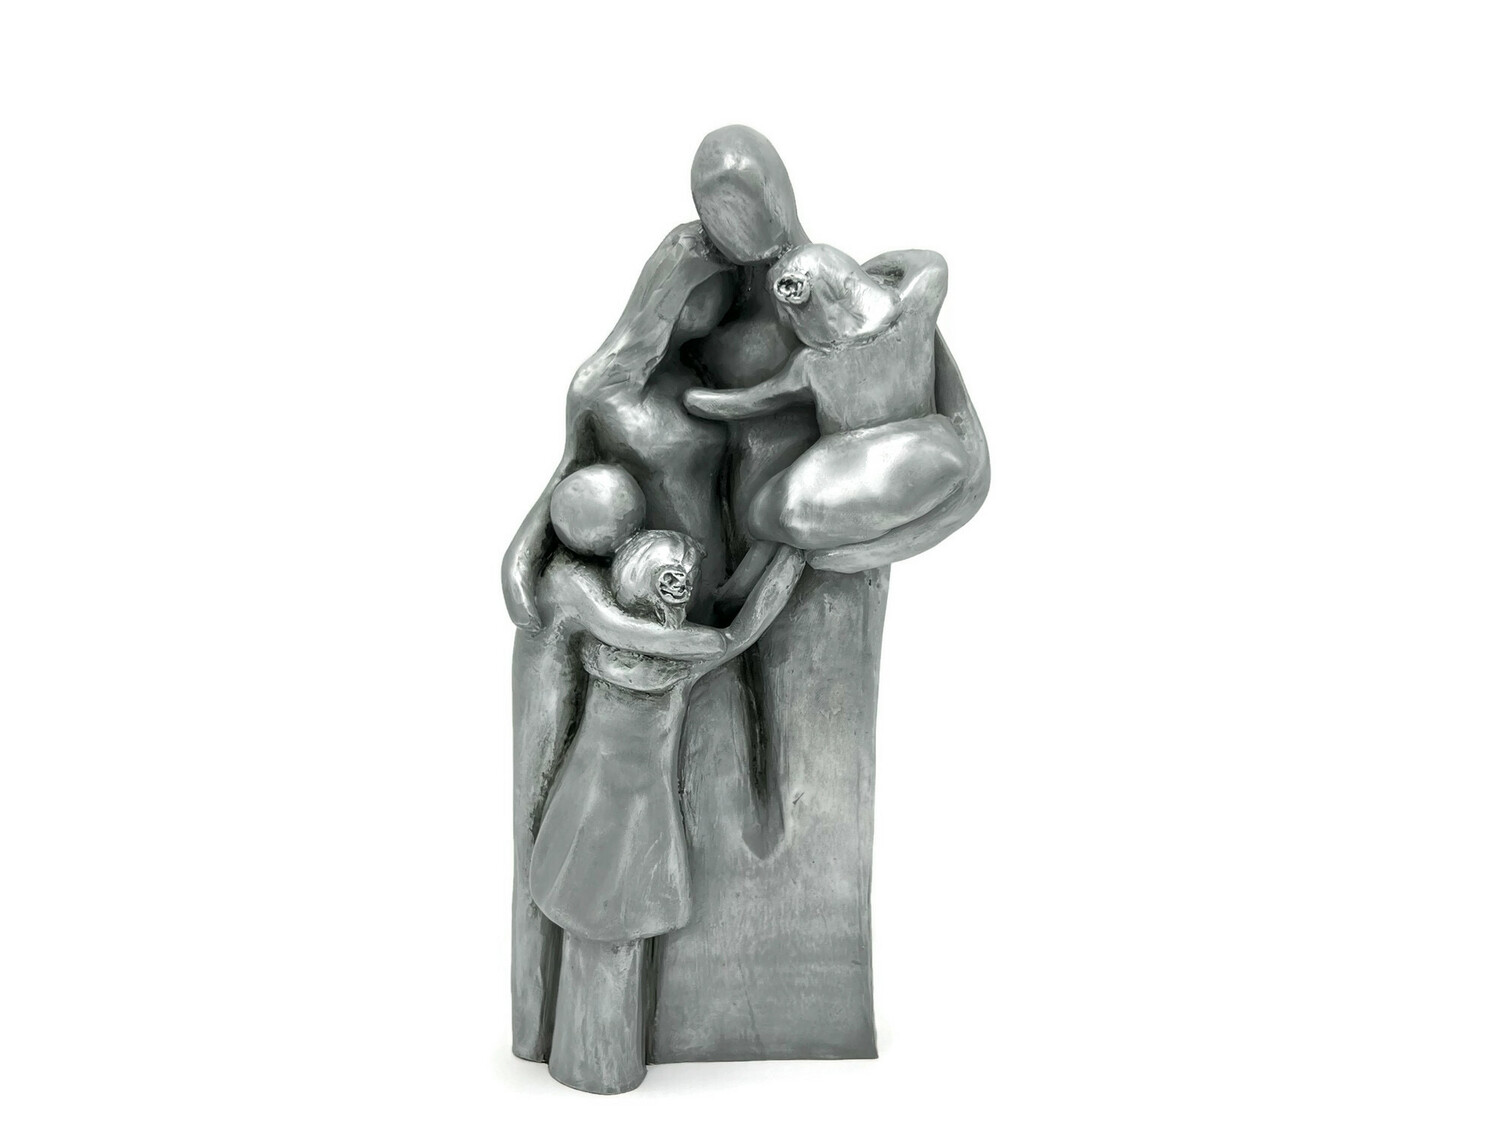 10th Anniversary Gift Aluminum Family Sculpture with Three Children